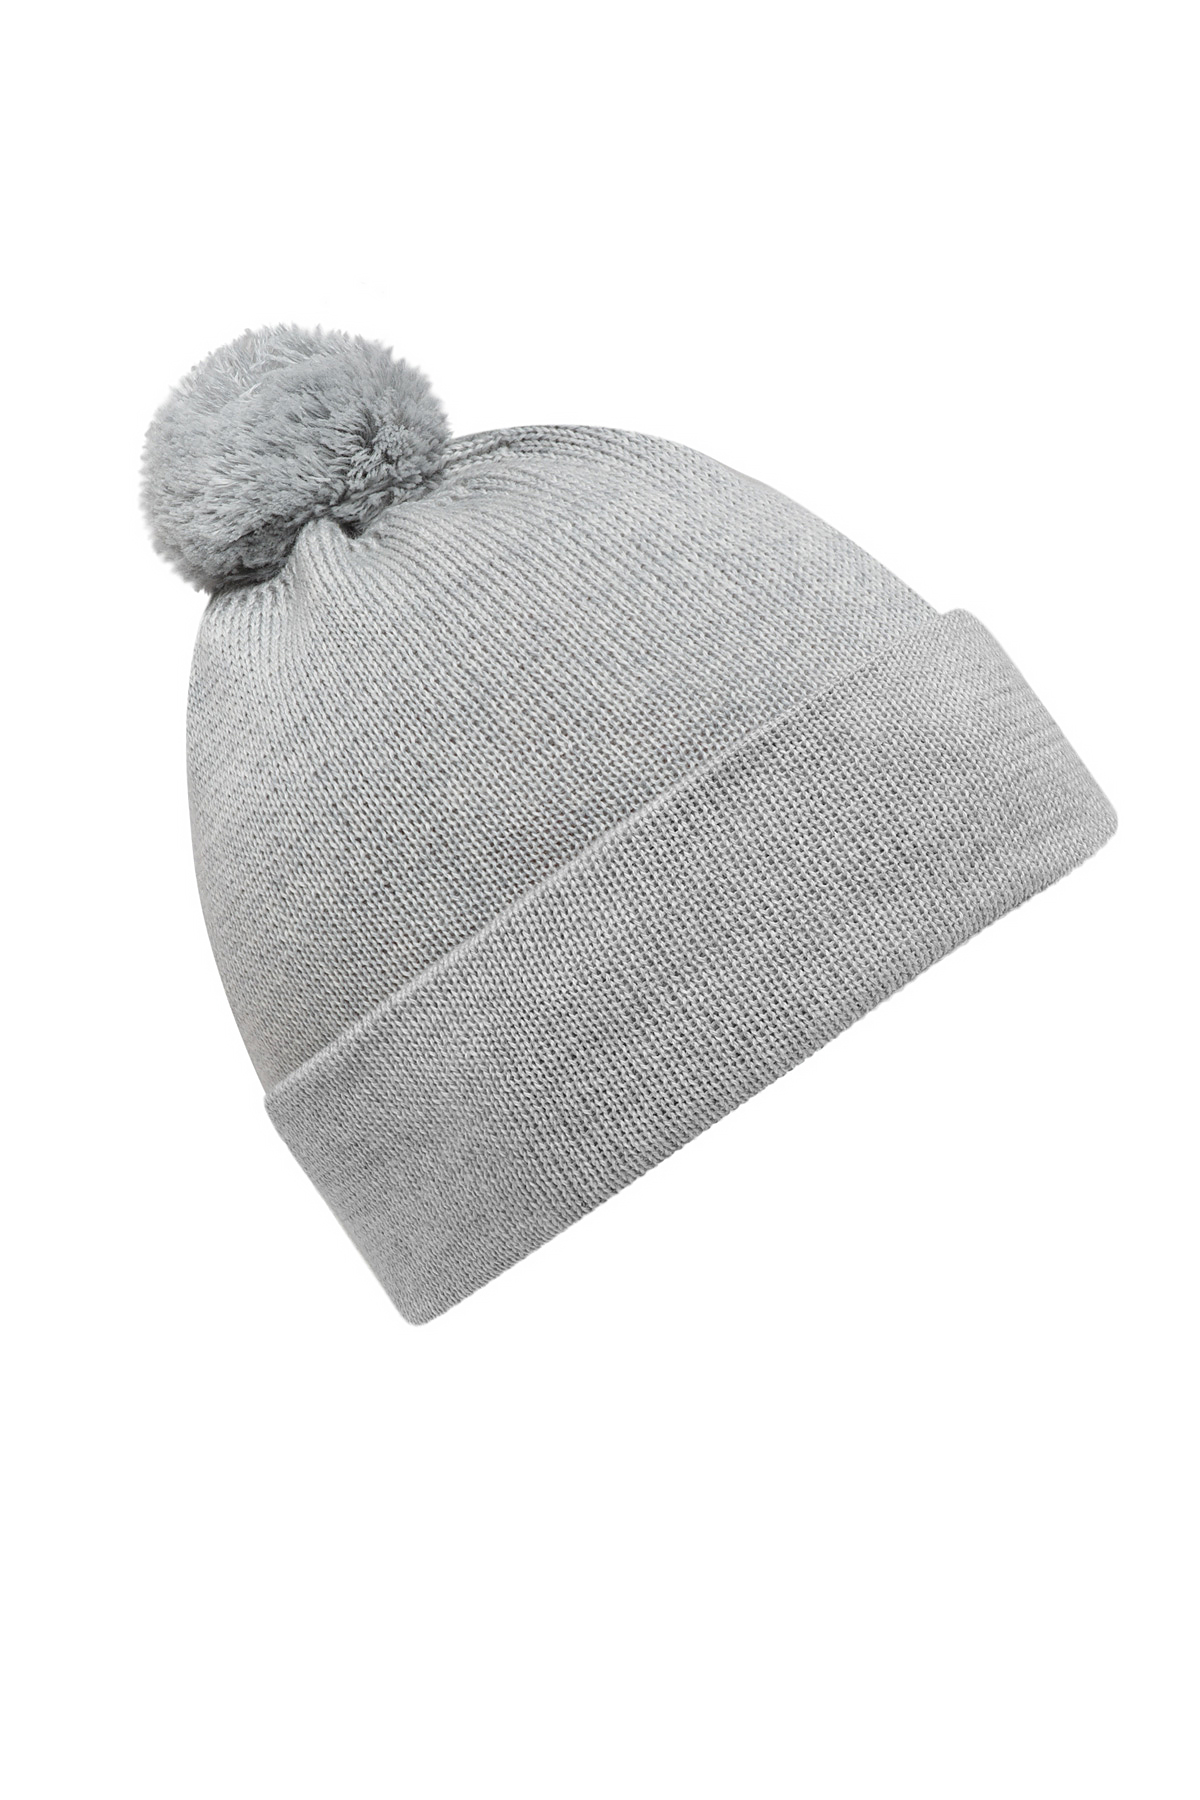 Image of a hat one pom pom in grey colour